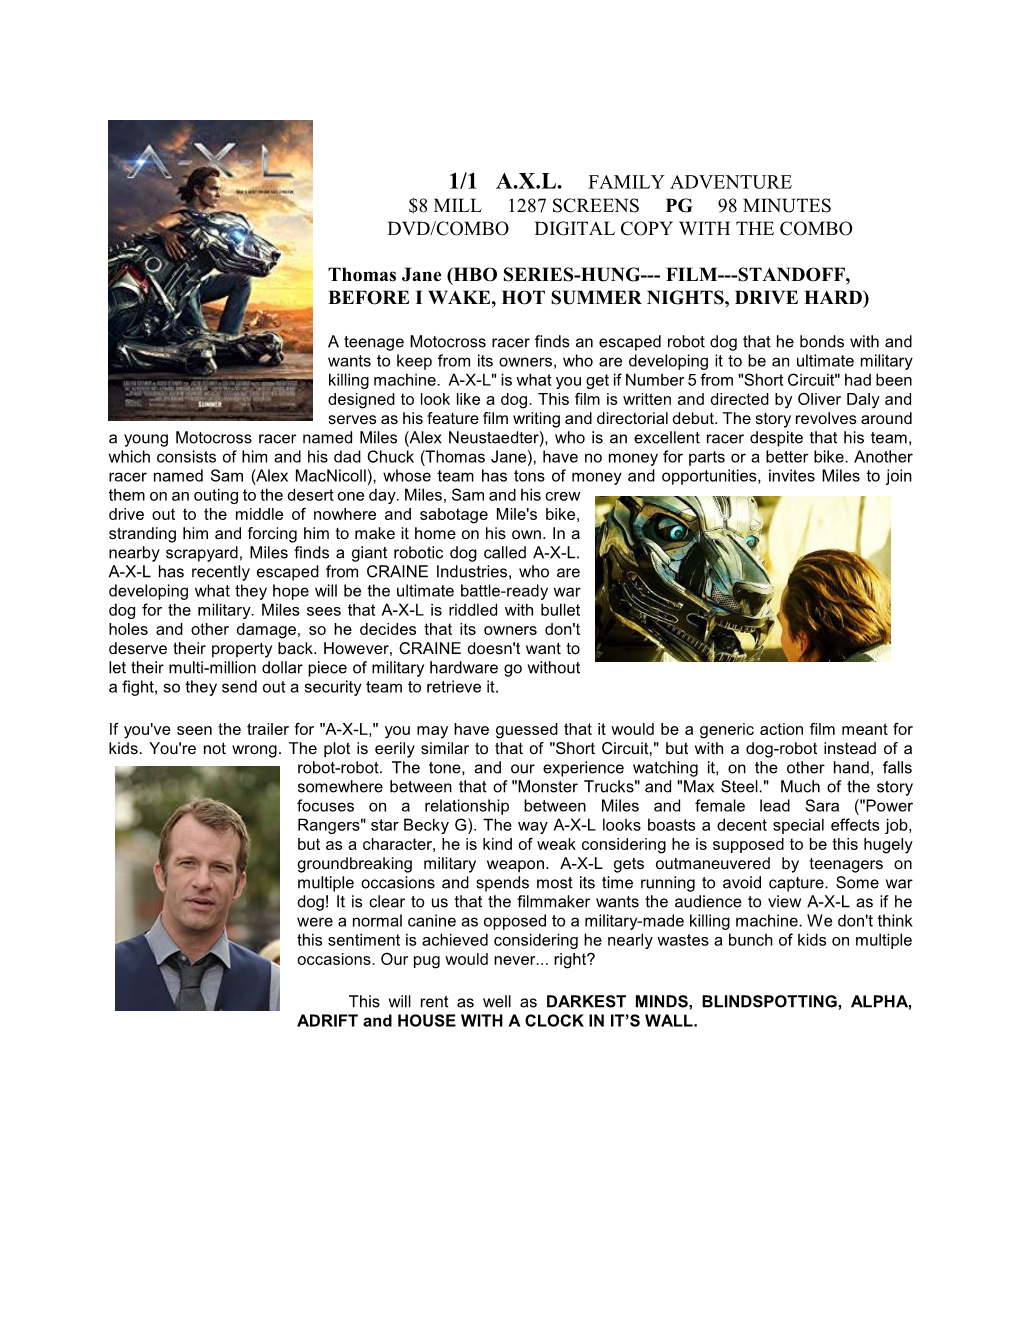 1/1 A.X.L. FAMILY ADVENTURE $8 MILL 1287 SCREENS PG 98 MINUTES DVD/COMBO DIGITAL COPY with the COMBO Thomas Jane